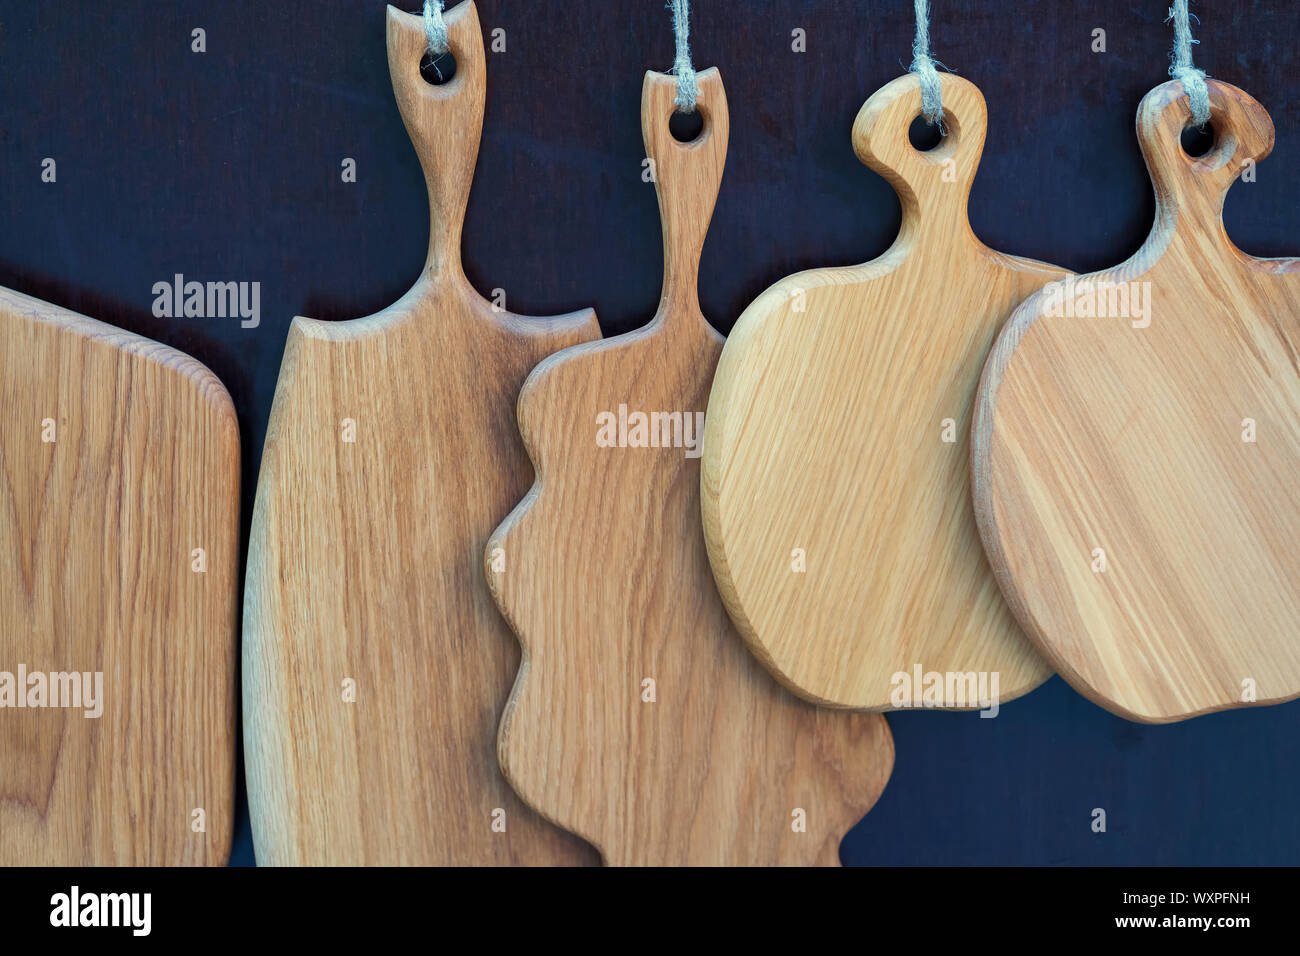 Wooden boards for the kitchen Stock Photo